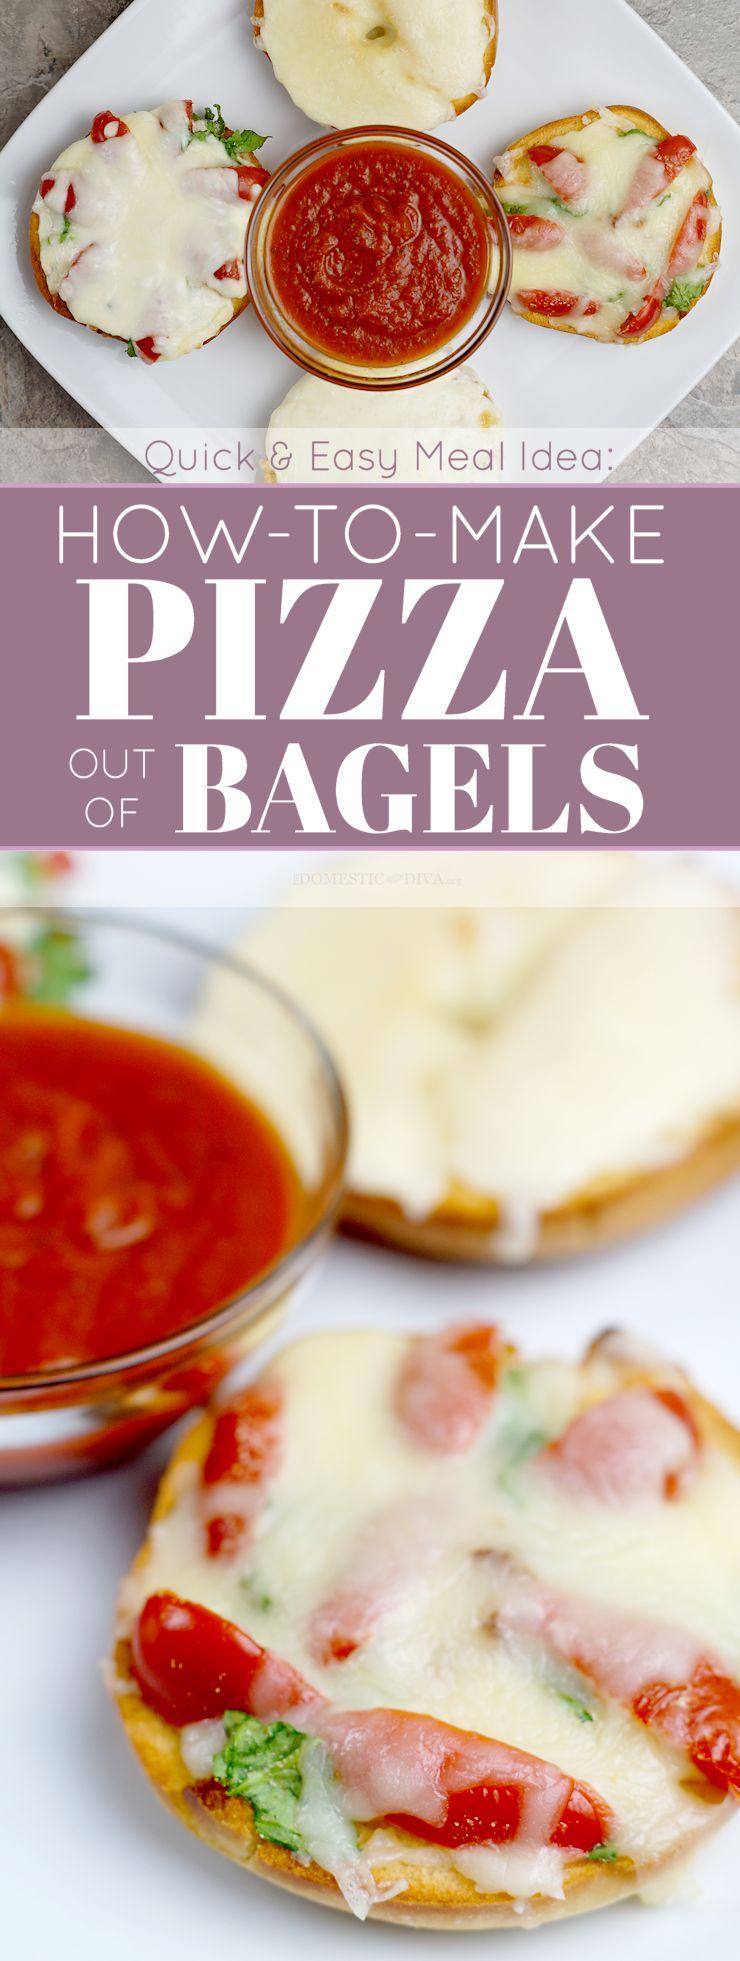 Quick and Easy Meal Idea: How to Make Pizza Out of Bagels (Recipe)